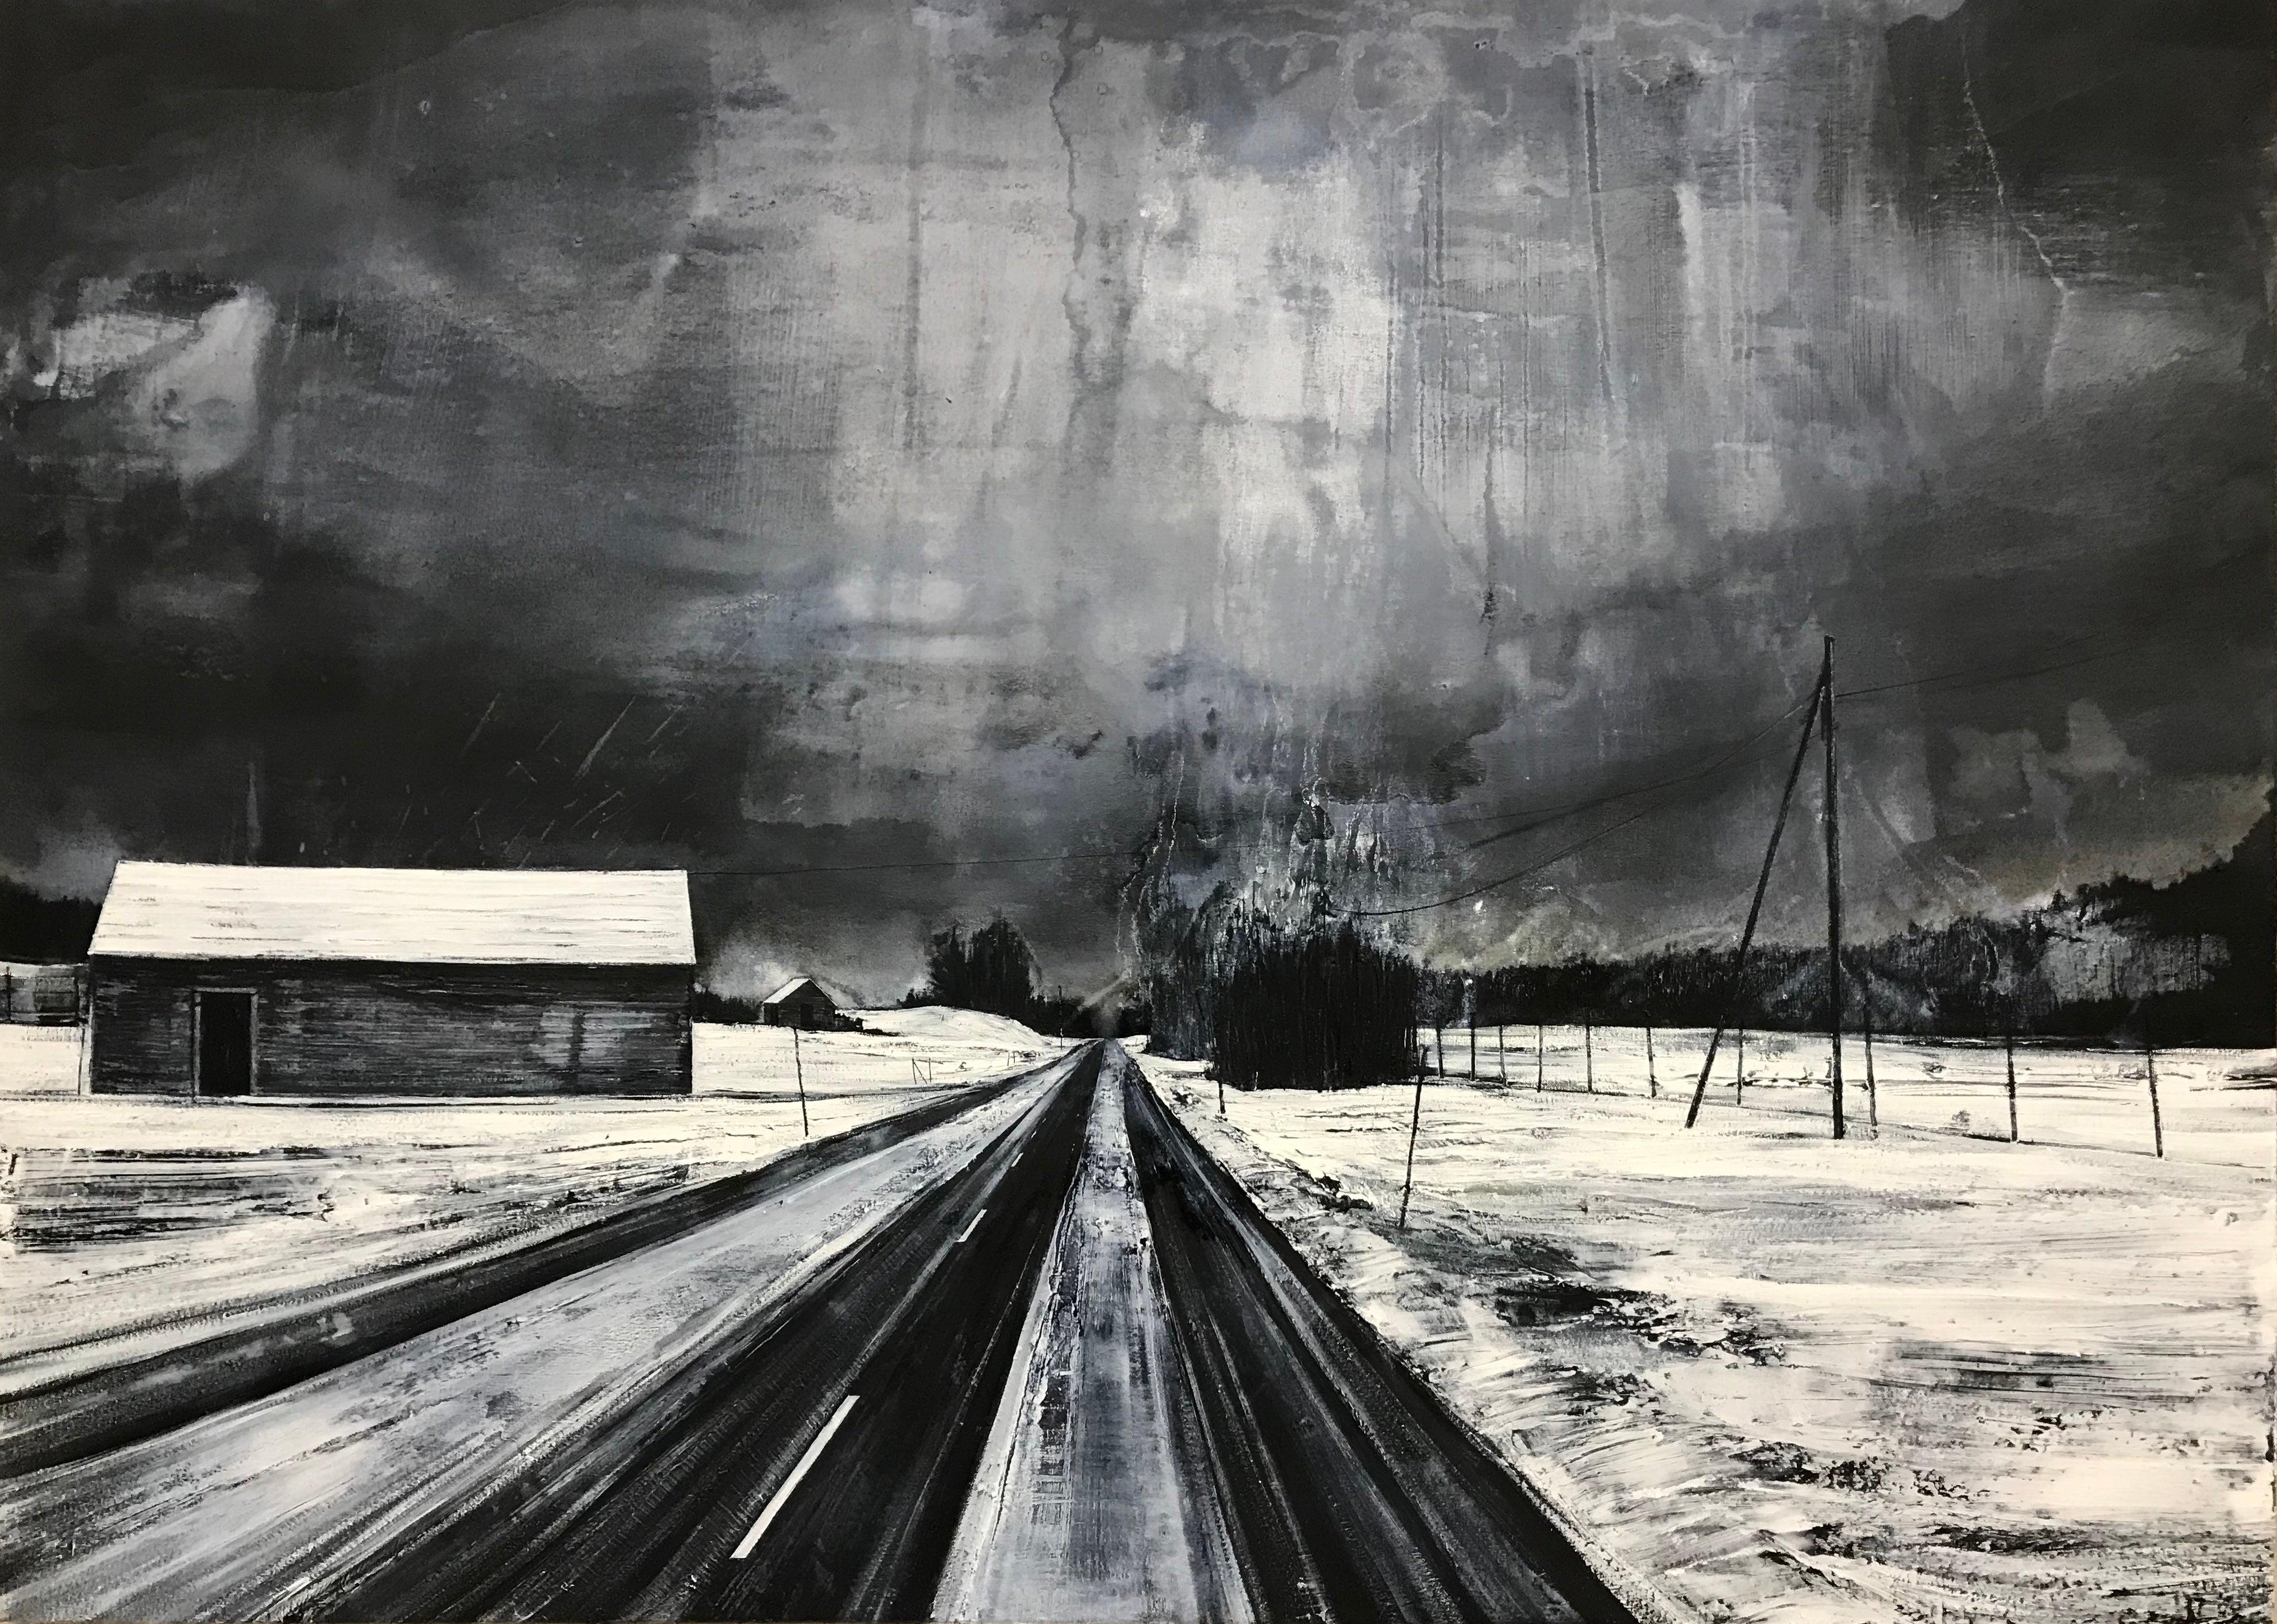 Revealed Wounds - Black & White Atmospheric Landscape Painting by Contemporary British Artist Mark Thompson. 
Mark is a seasoned professional painter with international representation in Sweden, Germany & the USA. 
We are proud to represent Mark